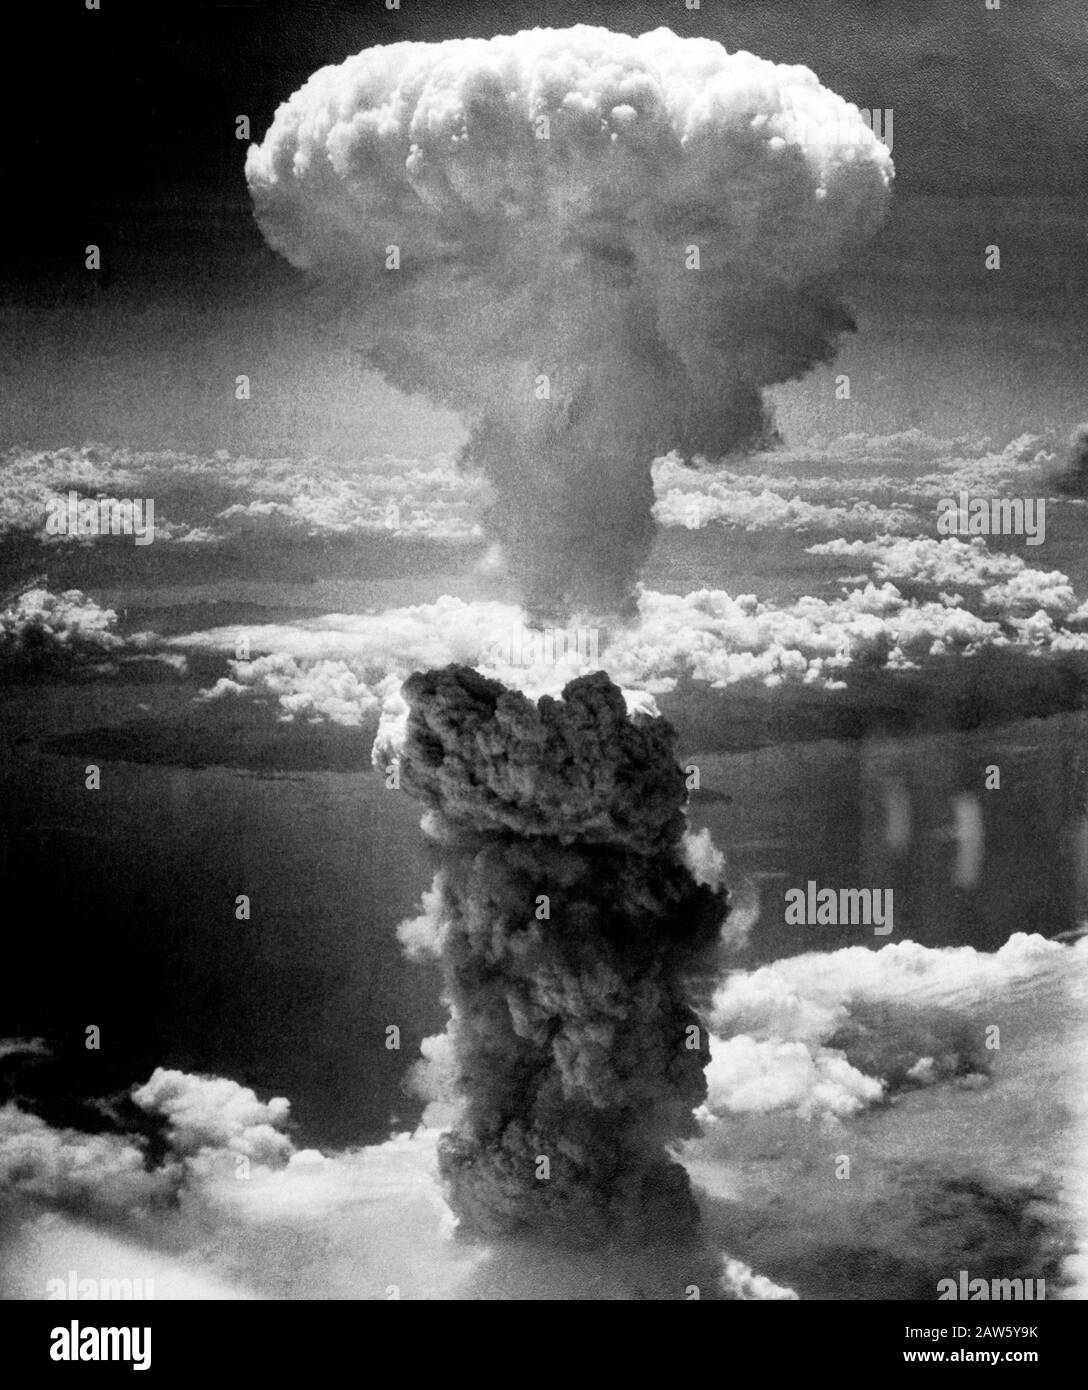 1945 ,9 august, JAPAN : The United States Army Air Forces ( USAAF ) dropped an ATOMIC BOMB on NAGASAKI , JAPAN , near the end of World War II . - ATTA Stock Photo